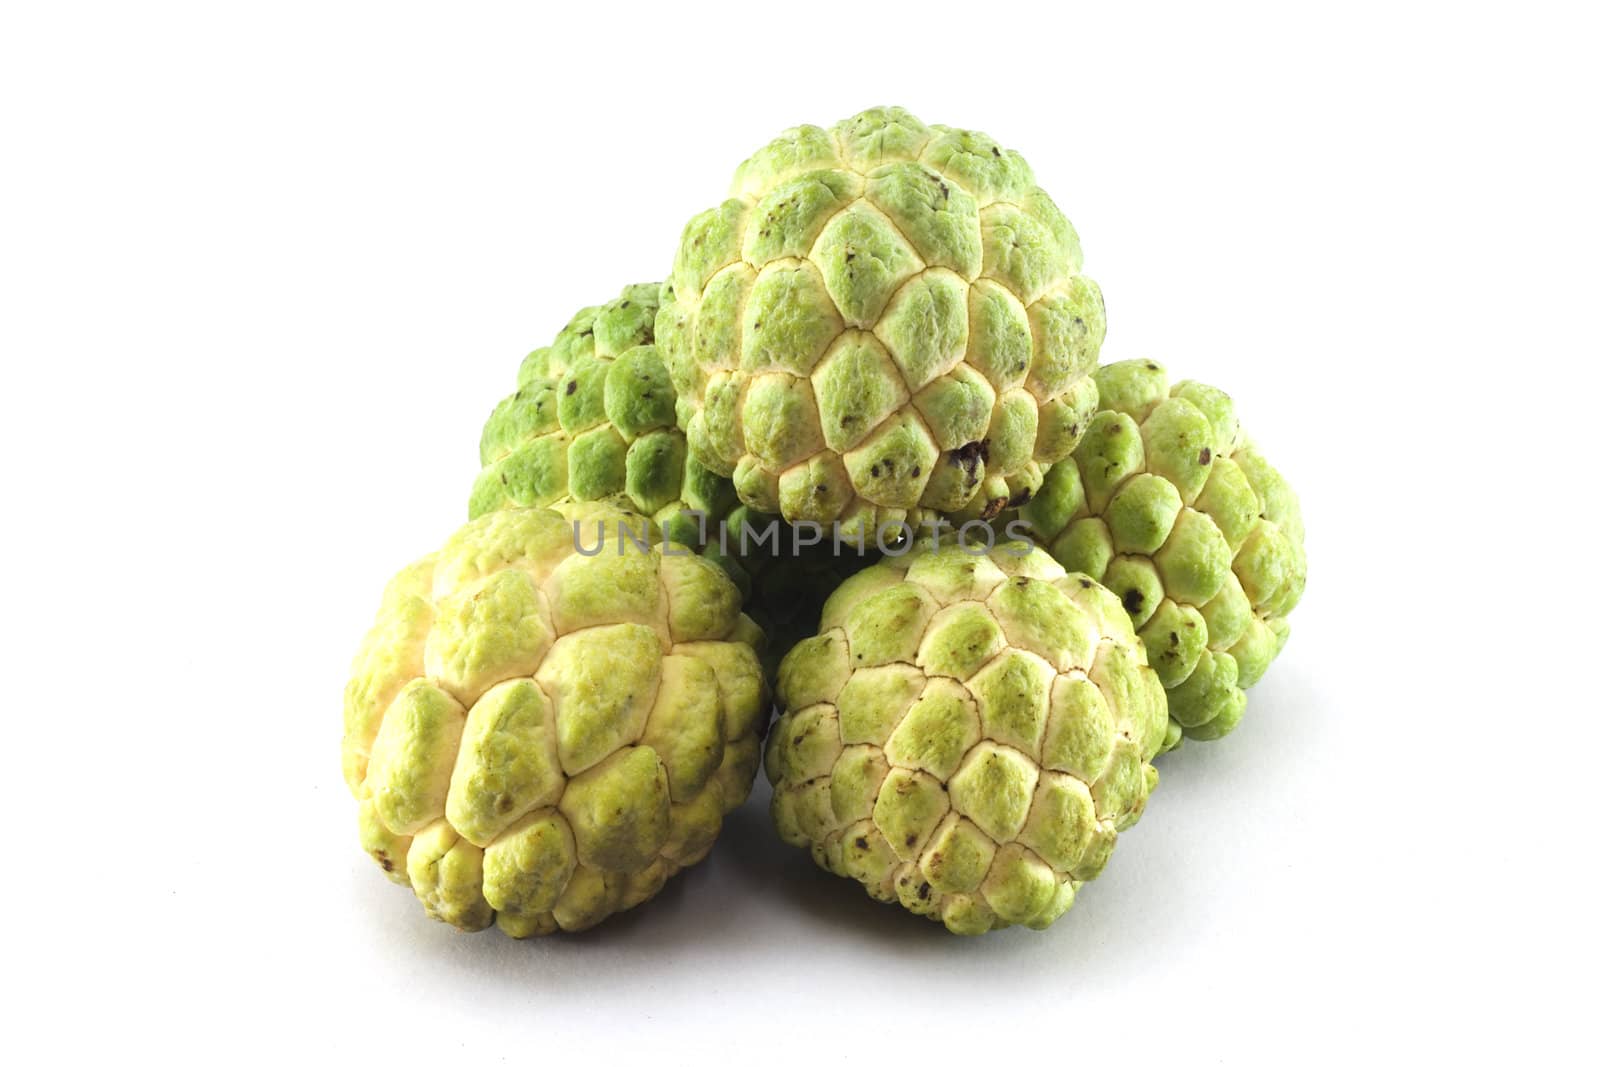 Custard apples group on white background with isolate.